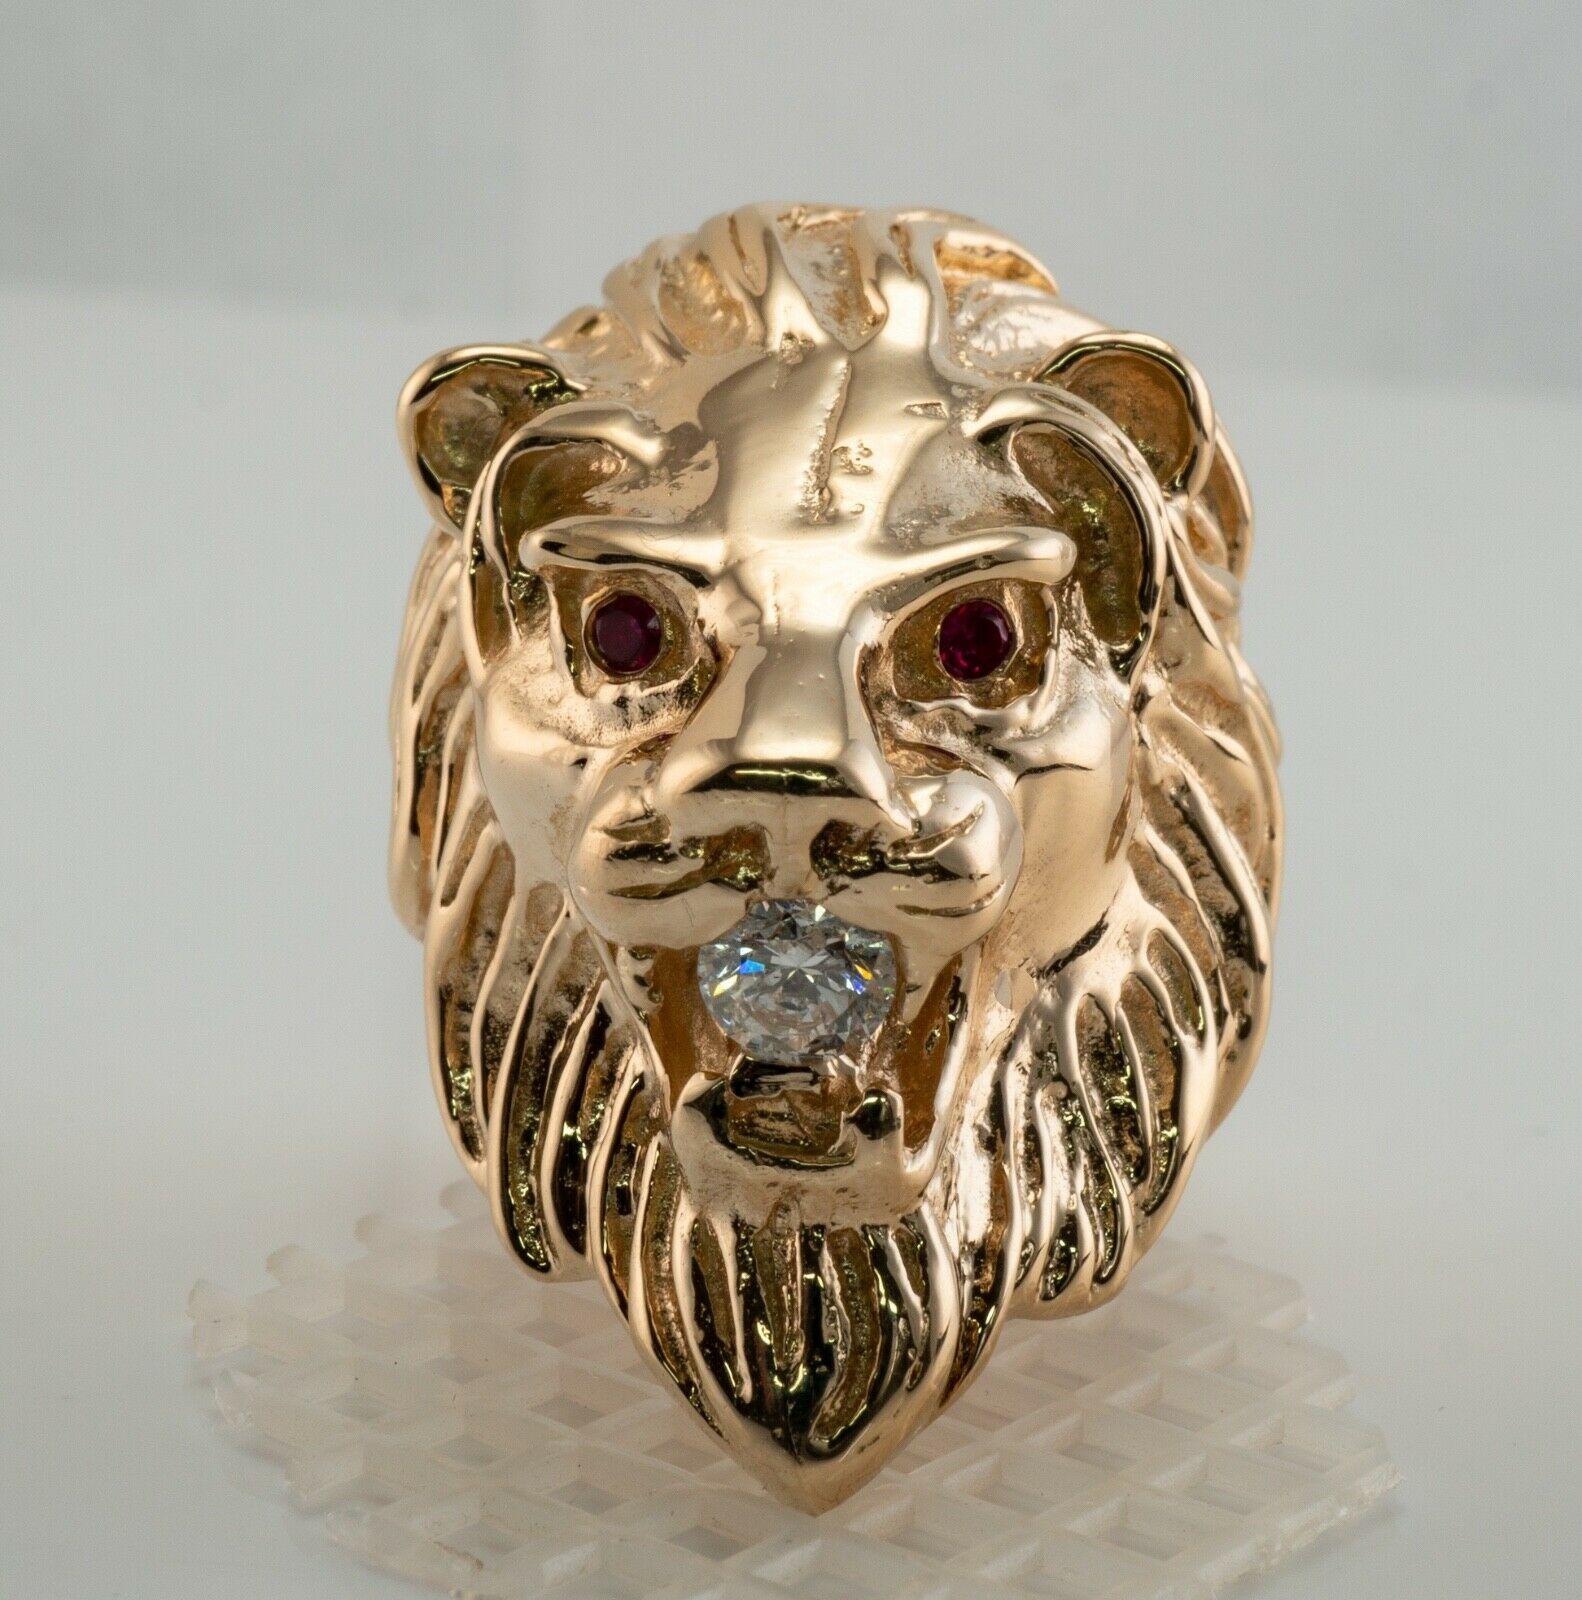 This spectacular huge vintage ring is finely crafted in solid 14K Yellow gold (carefully tested and guaranteed), and made in the shape of a Lion's head. The diamond in lions' mouth is .42 carat of SI2 clarity and H color. Two natural Earth mined